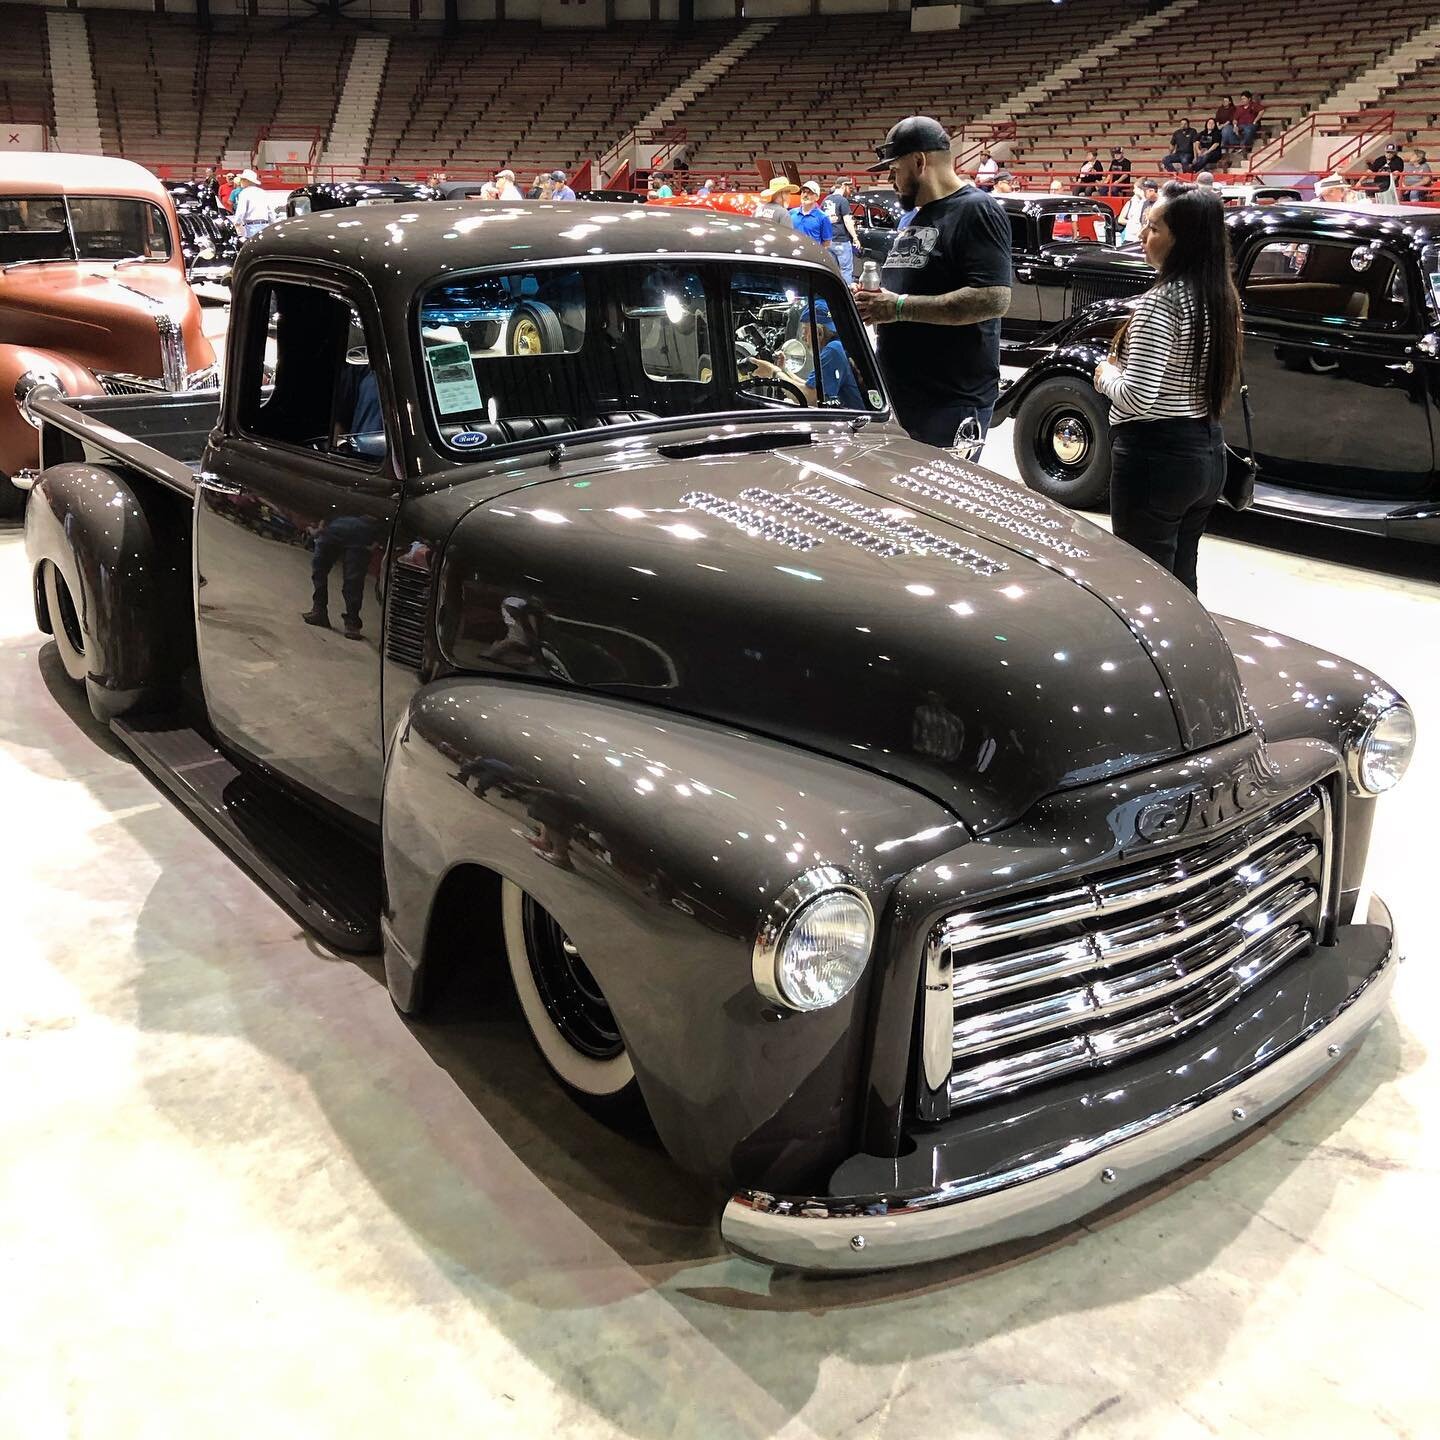 The @kontinentals pick at the 5th Annual #bayouroundup was Dwane &ldquo;Choppa&rdquo; Breaux&rsquo;s  beautiful 1954 GMC truck, home built by Dwane in Hahnville, Louisiana - we dug all the nice custom touches on this pickup and the unusual color comb